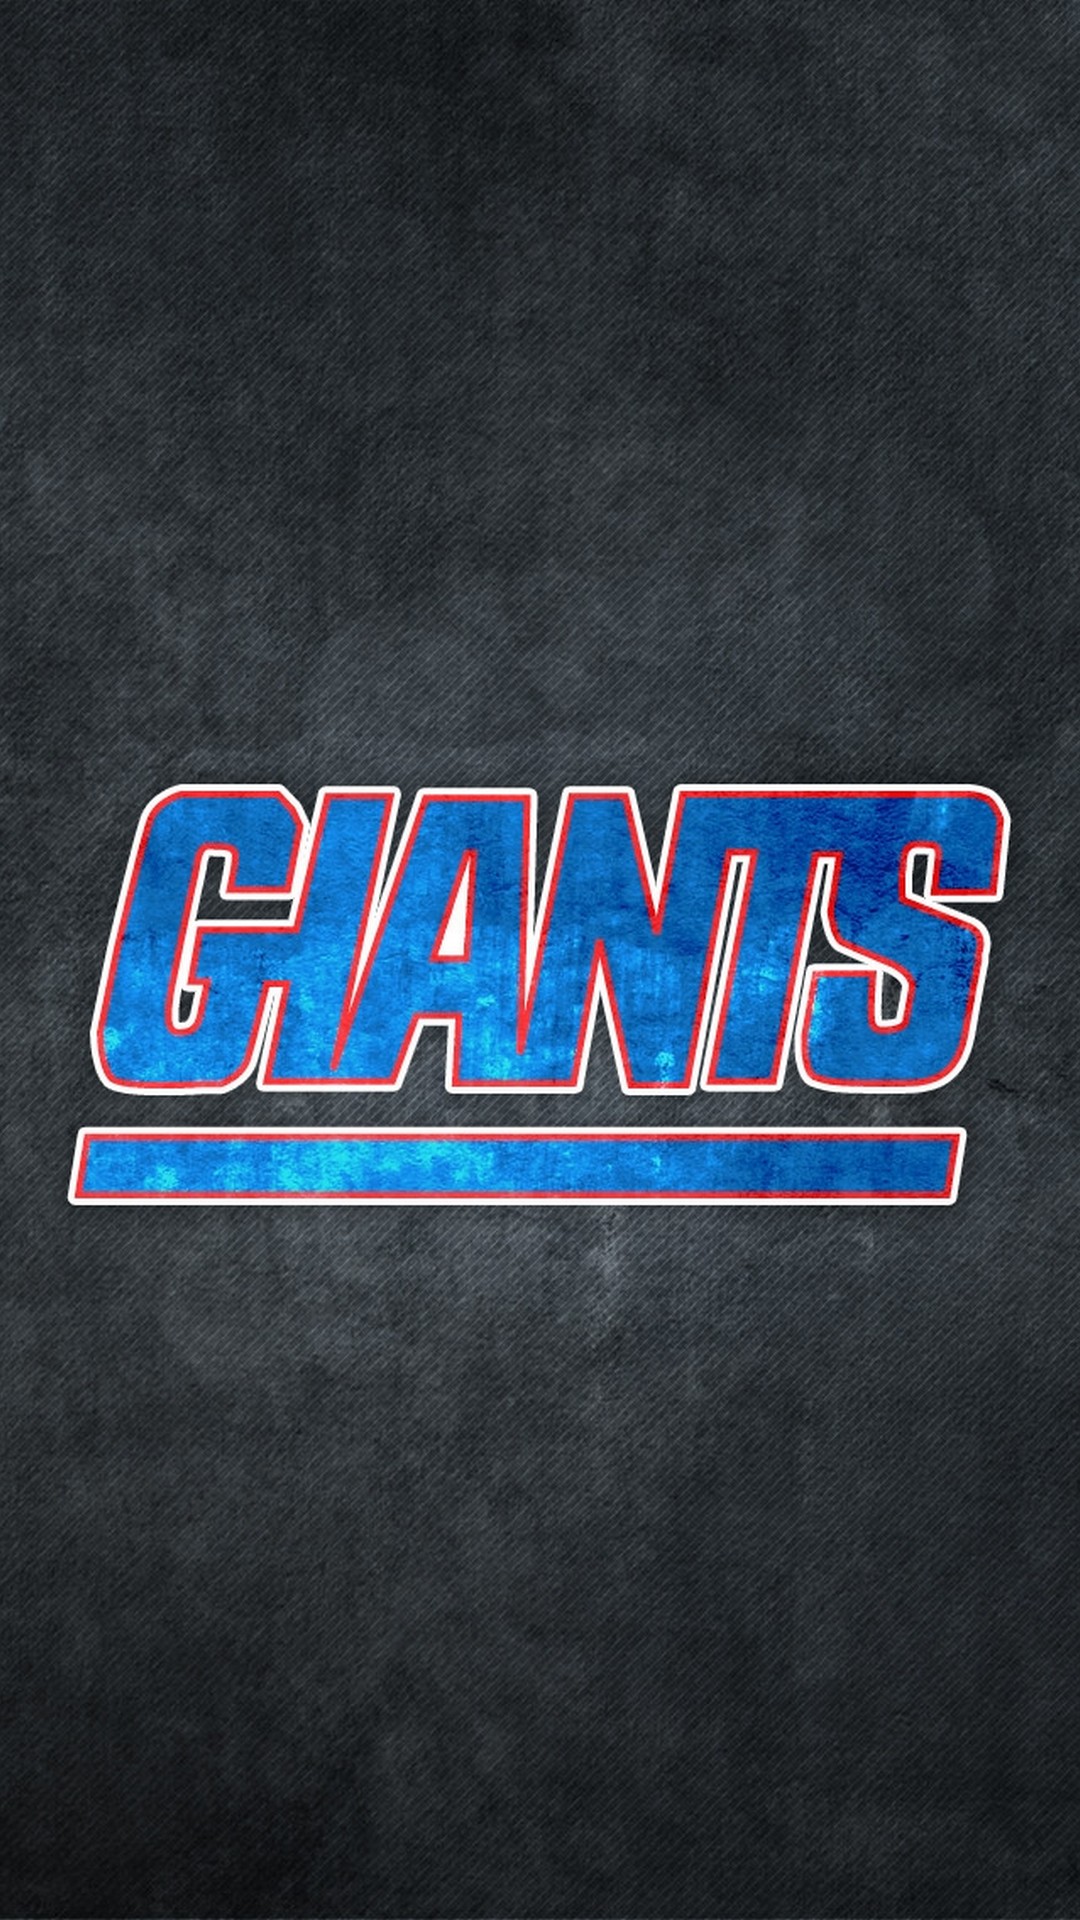 New York Giants iPhone Home Screen Wallpaper with high-resolution 1080x1920 pixel. Download and set as wallpaper for Desktop Computer, Apple iPhone X, XS Max, XR, 8, 7, 6, SE, iPad, Android